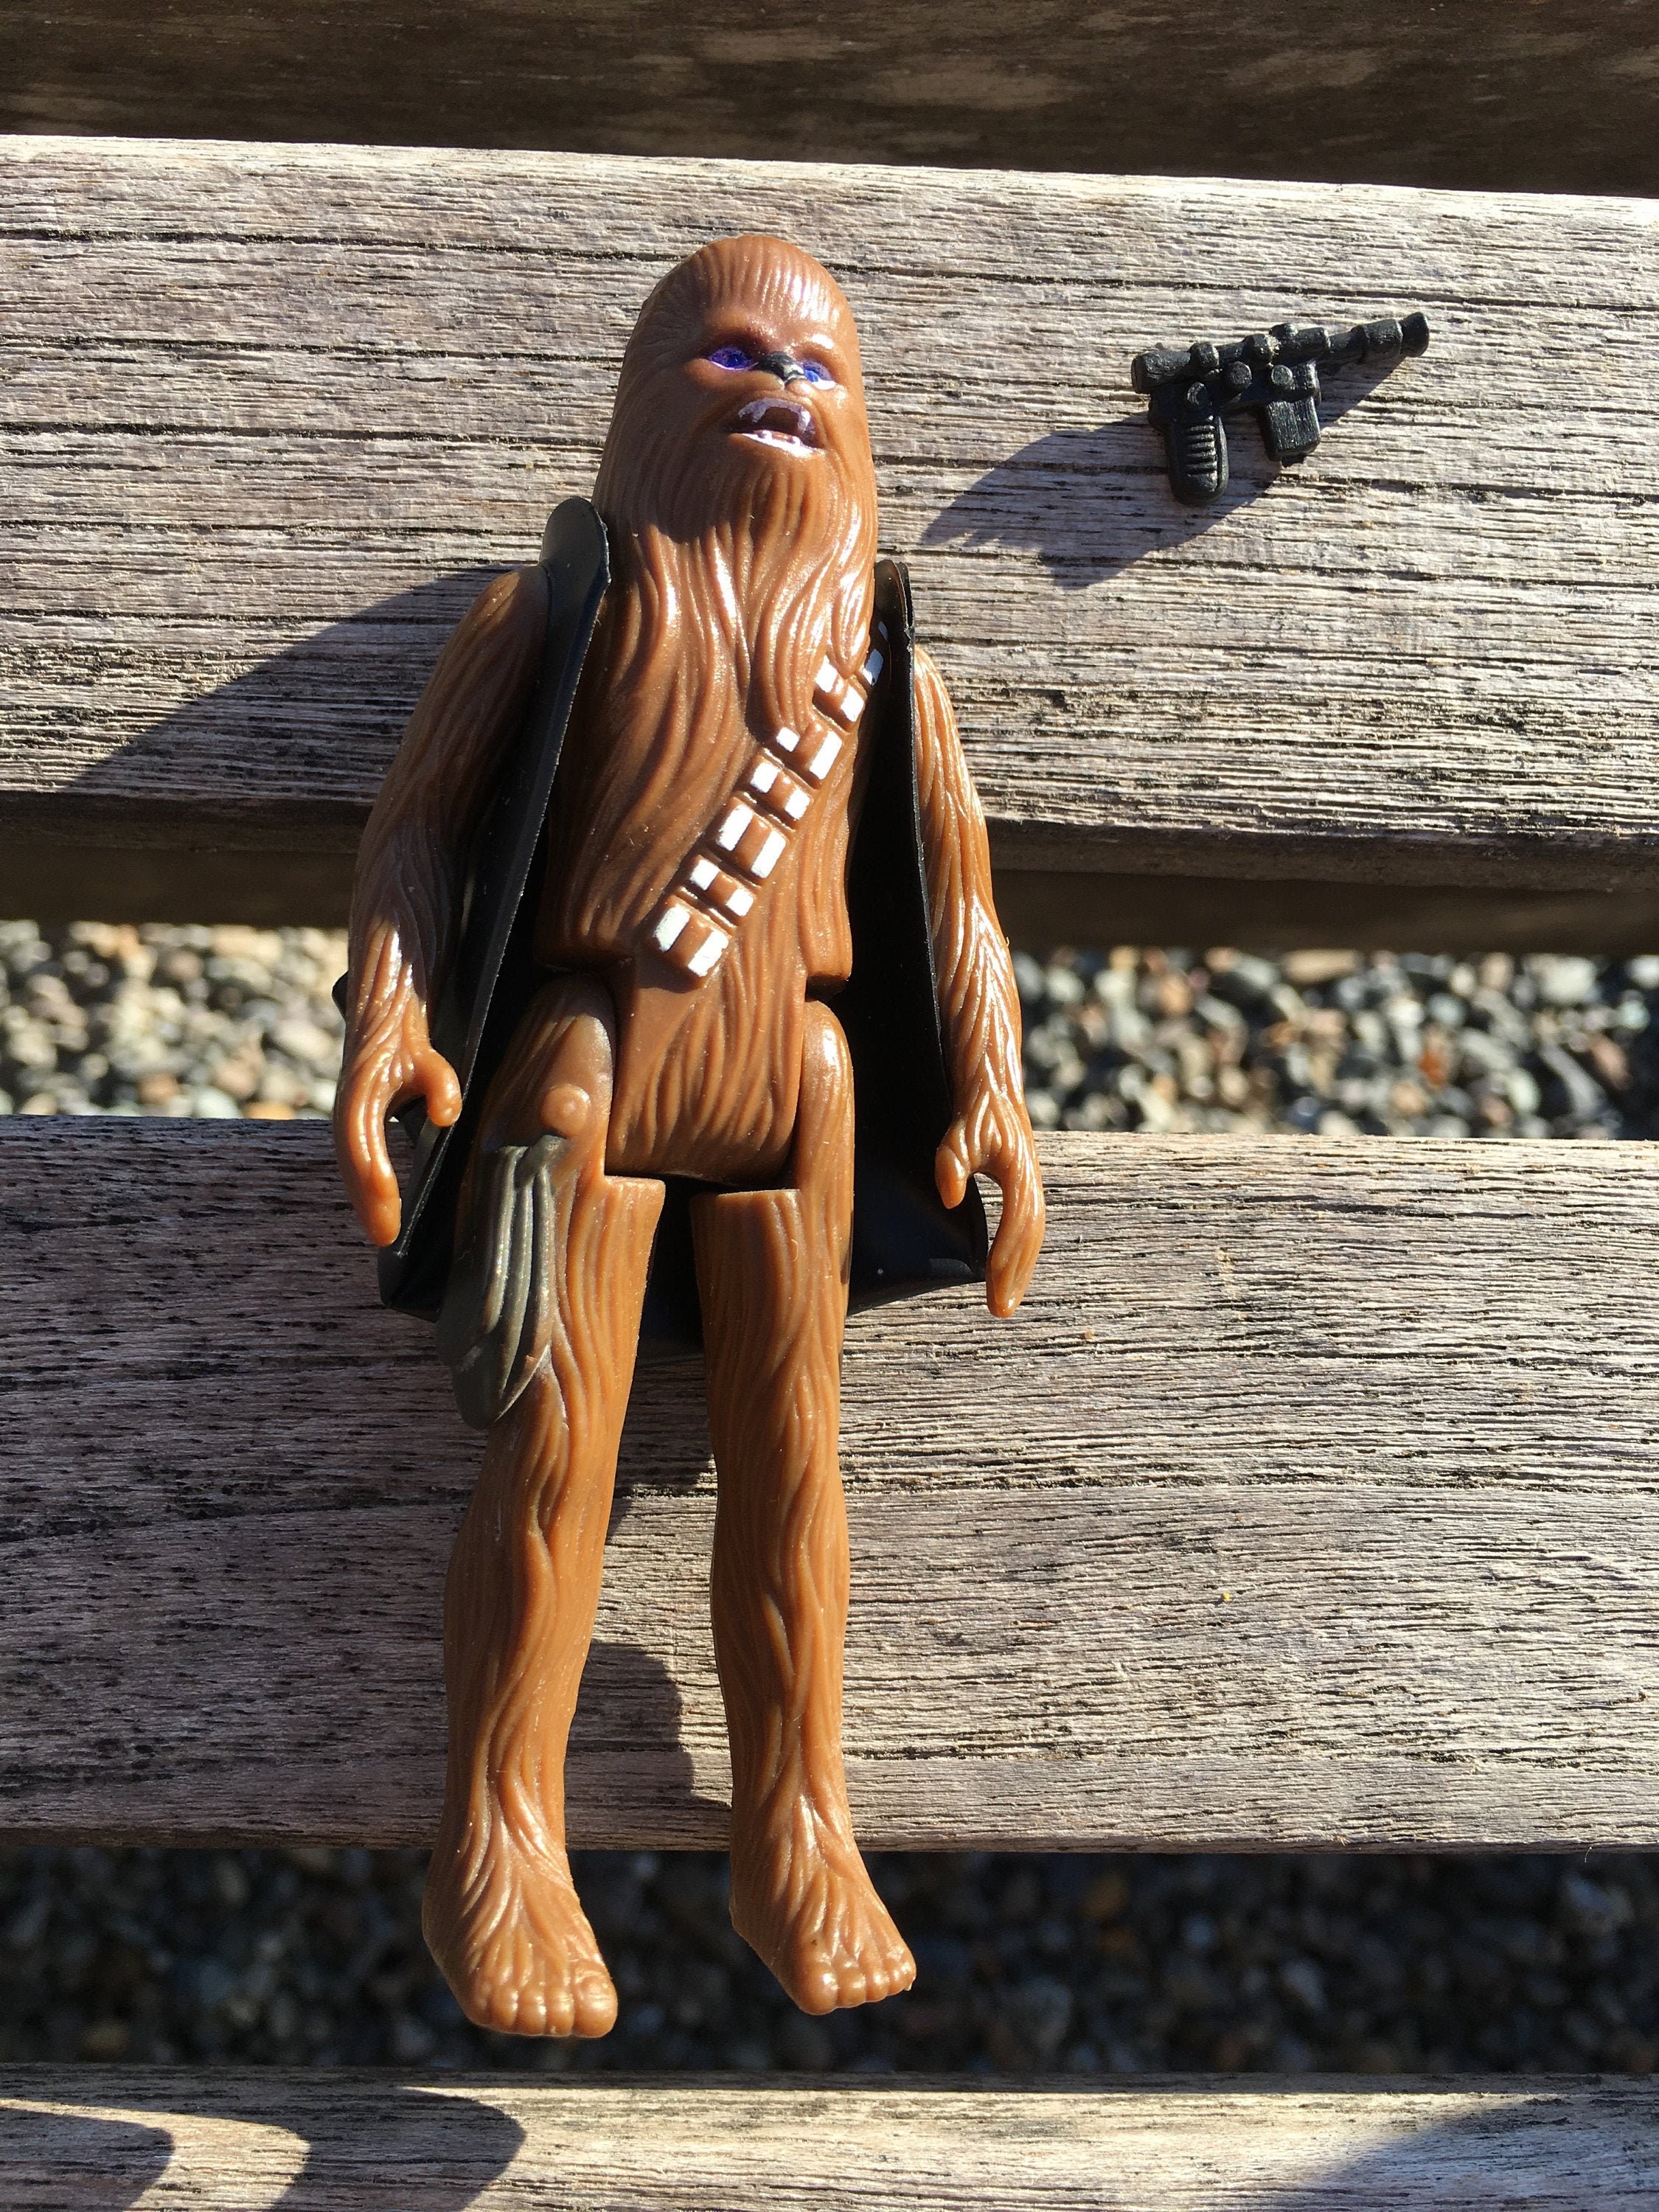 Star Wars Vintage Kenner Loose Complete Chewbacca Action Figure Near Mint